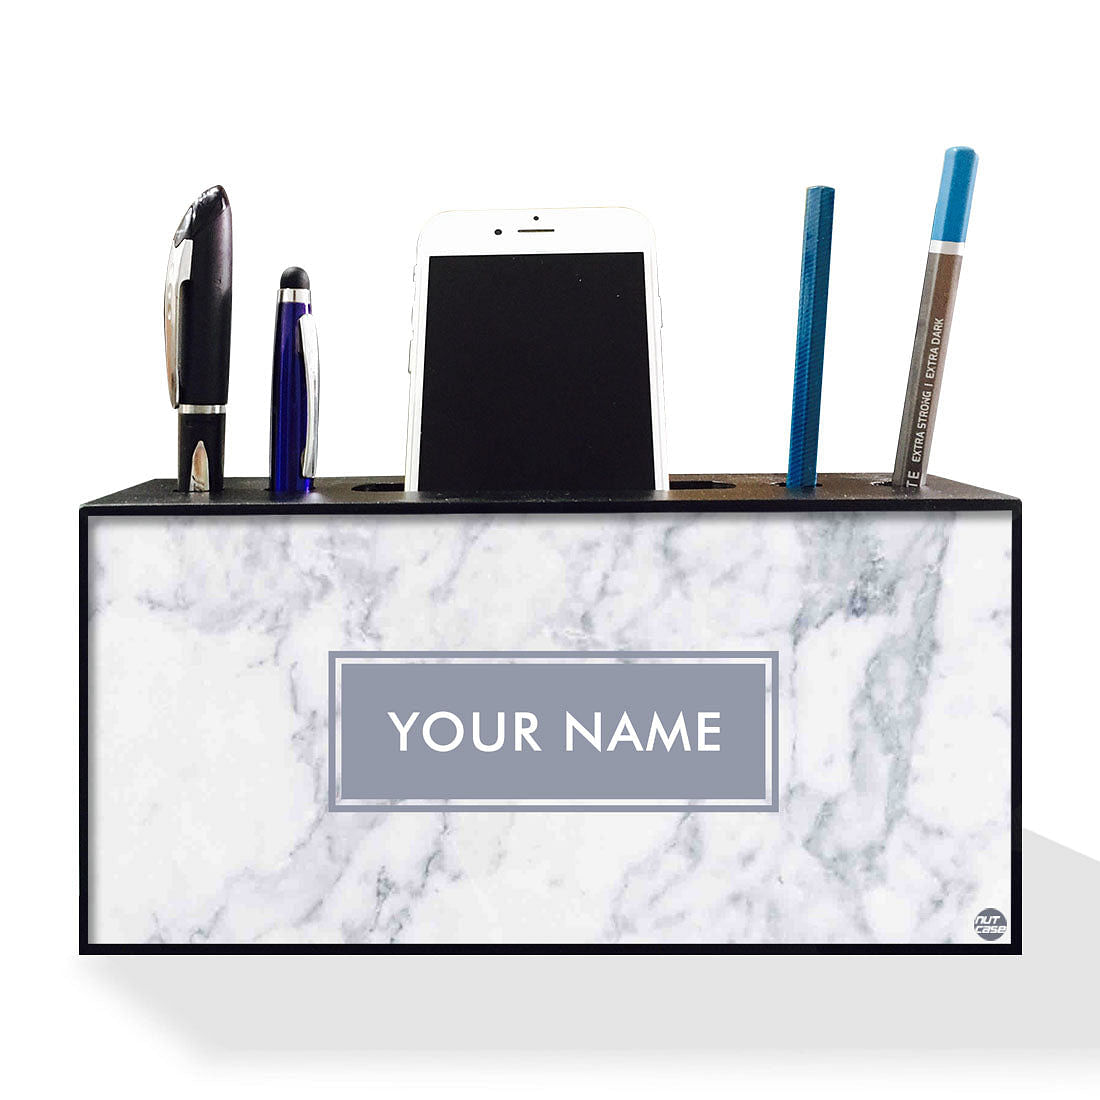 Unique Customized pen Stand Holder - Add Your Name Nutcase